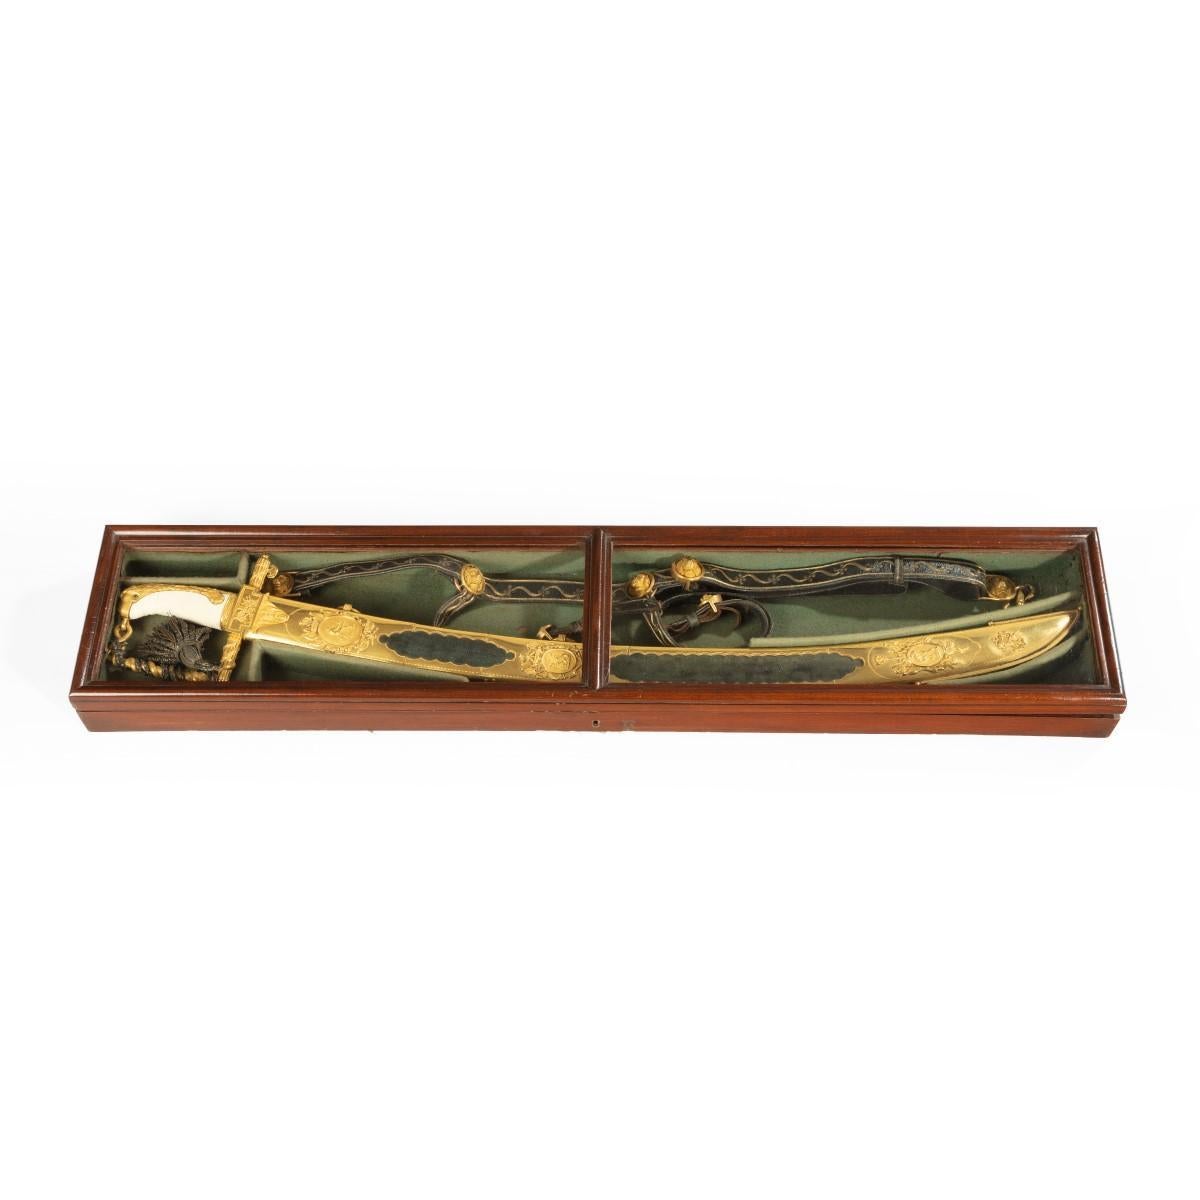 A cased Lloyds £ 50 sword for valour awarded to Lt. Ogle Moore of H.M.S. Maidstone, 1804, the curved single-edged hollow-ground blade (minor areas of wear) richly etched and gilt against blue ground with flowers, foliage, a naval trophy, figures of